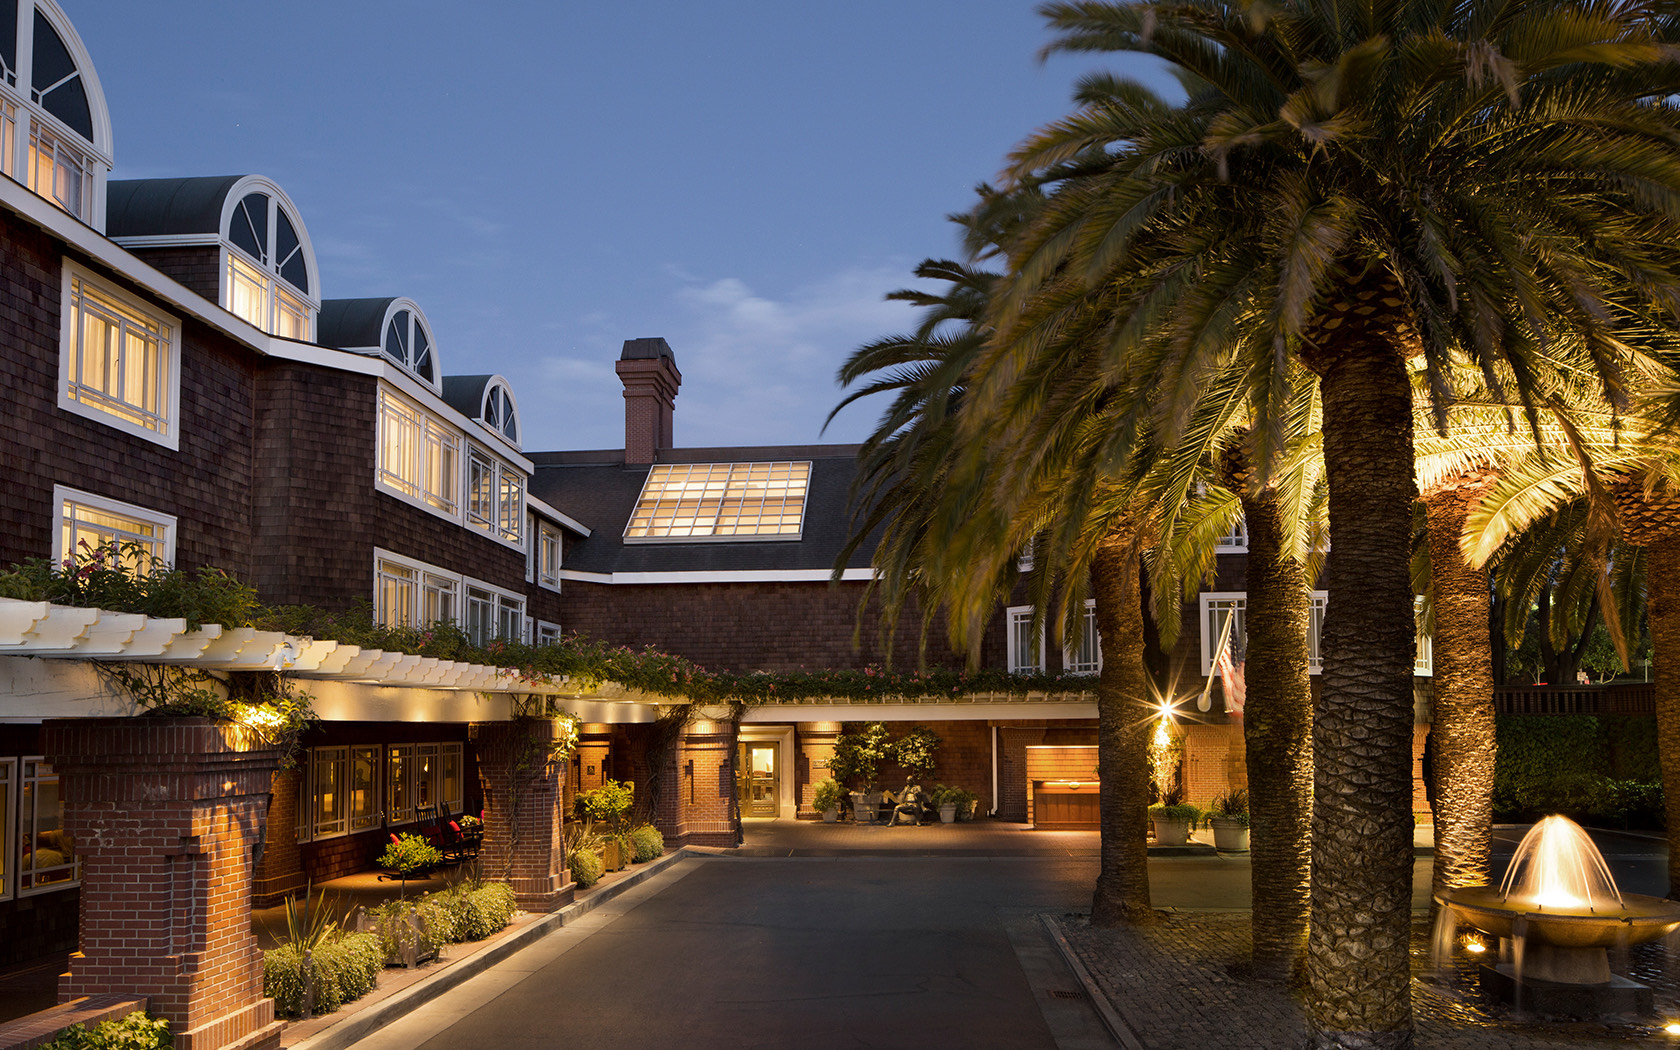 Exterior view of the Stanford Park Hotel at dusk